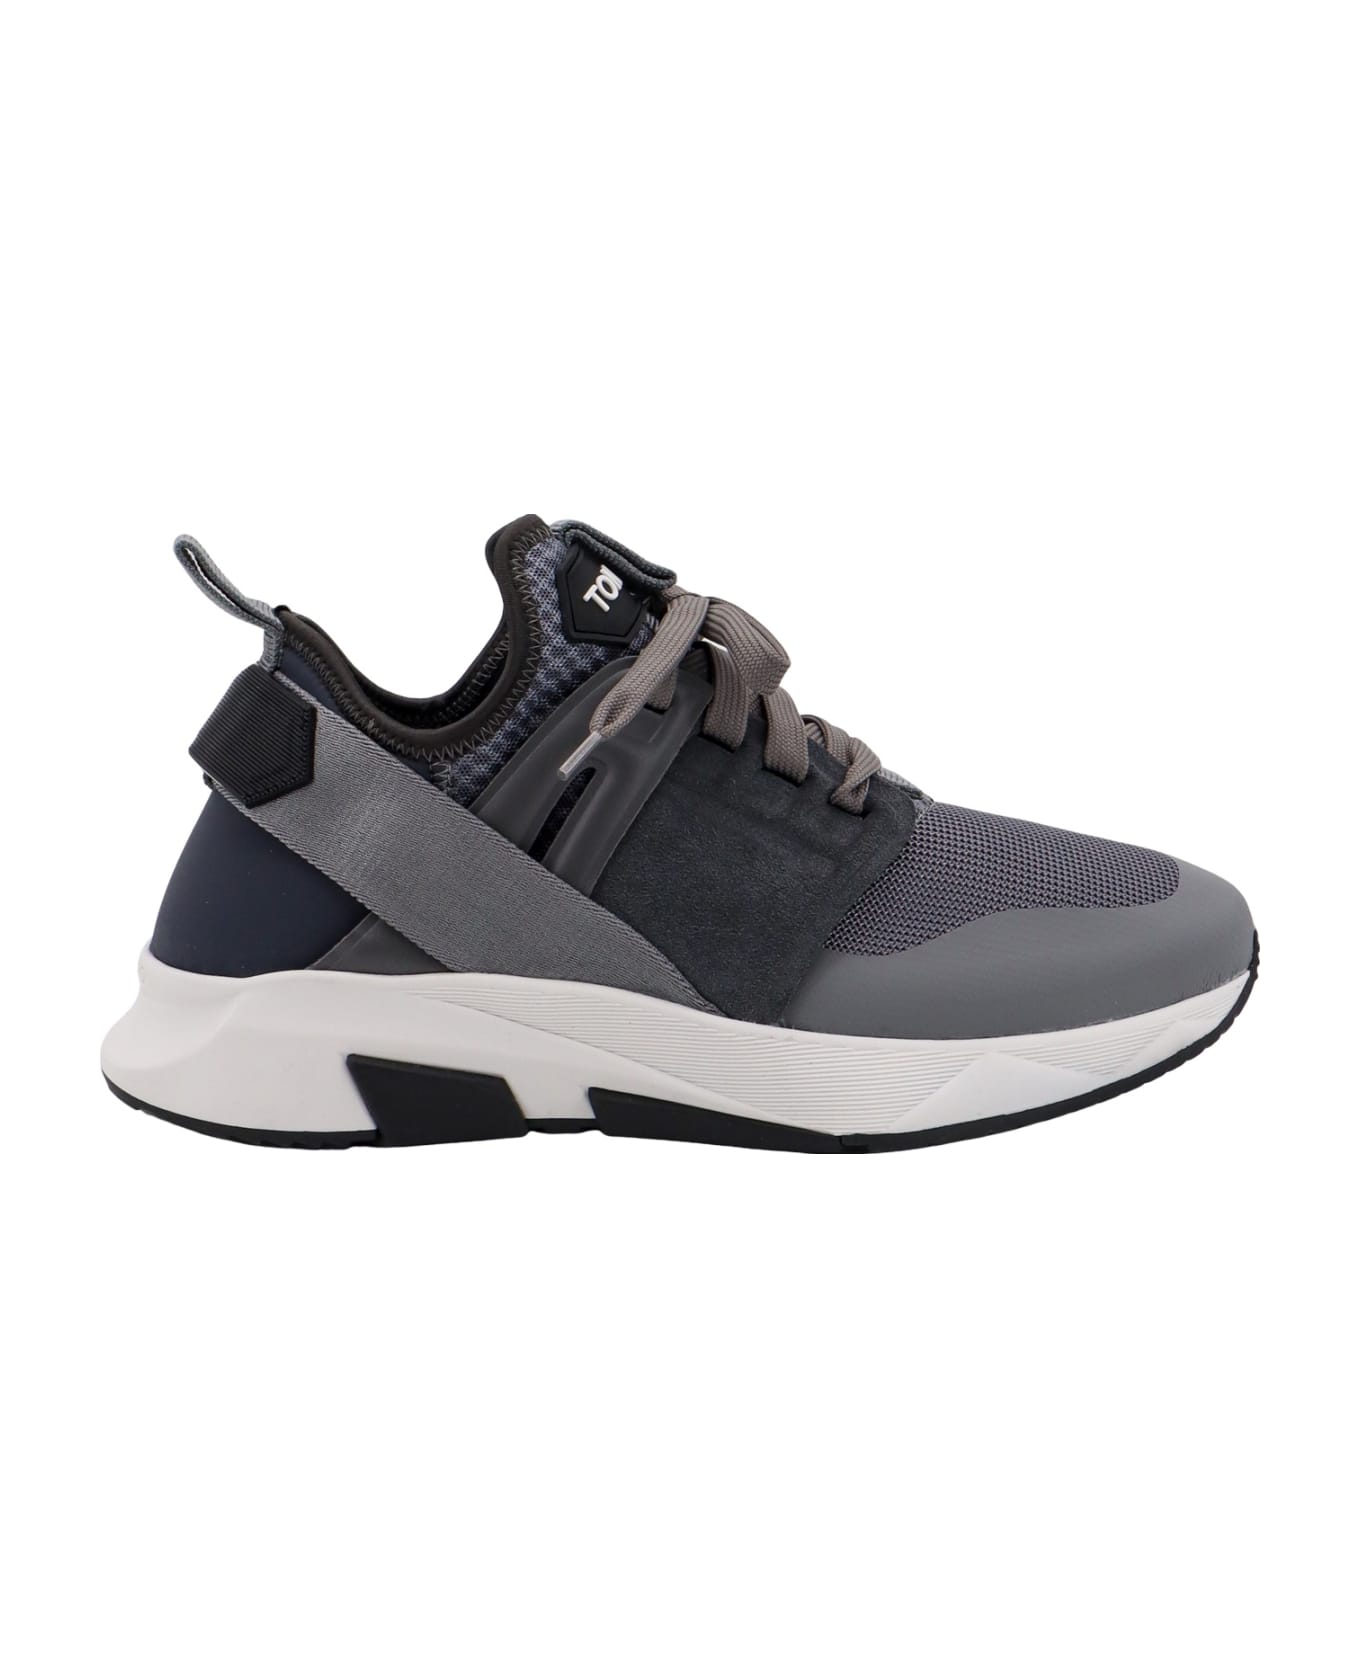 Tom Ford Jago Sneakers - Grey/white